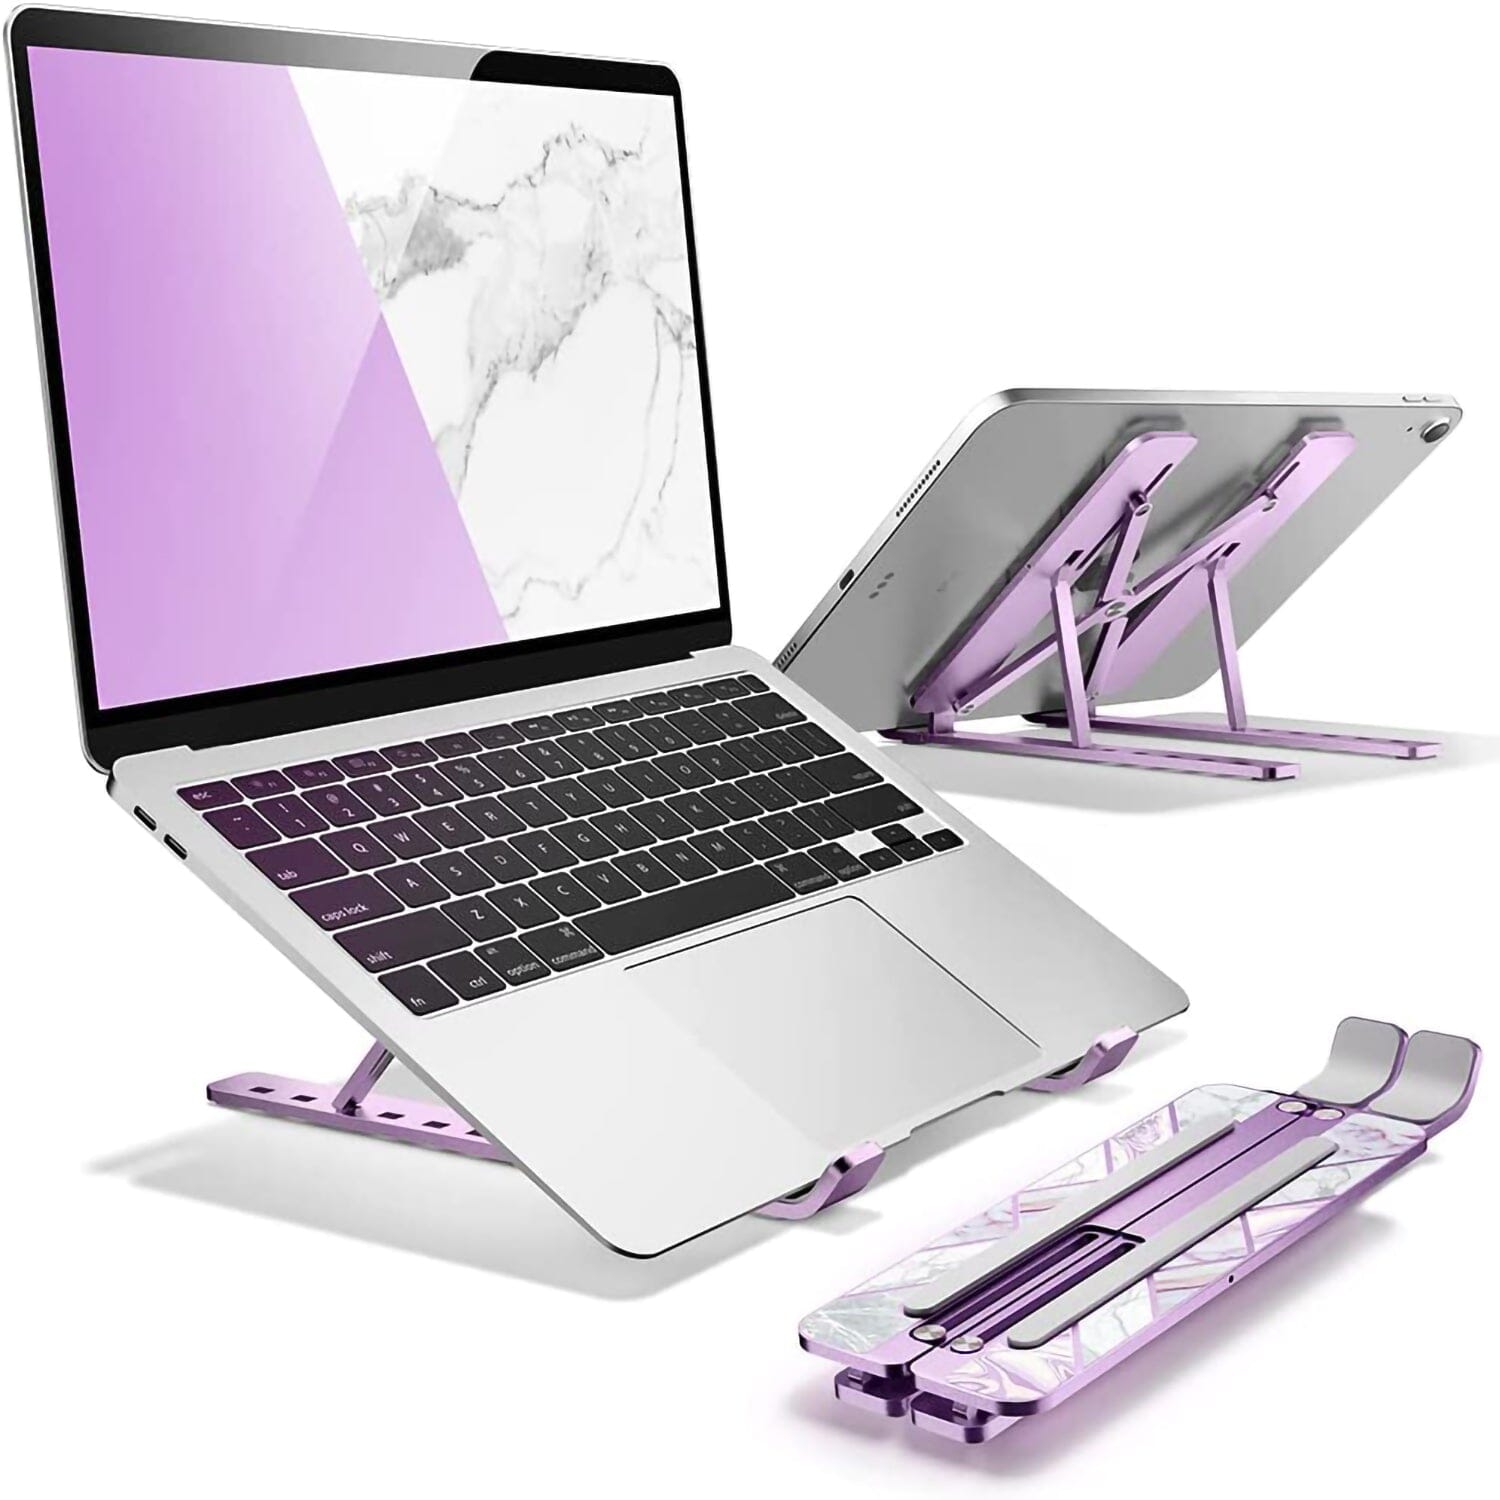 i-Blason Cosmo Series Adjustable Laptop Stand, Portable Computer Stand Aluminum Alloy Laptop Riser Holder with Multi-Angle Stand Suitable for 7-17.3" Laptops and Tablets Default i-Blason 